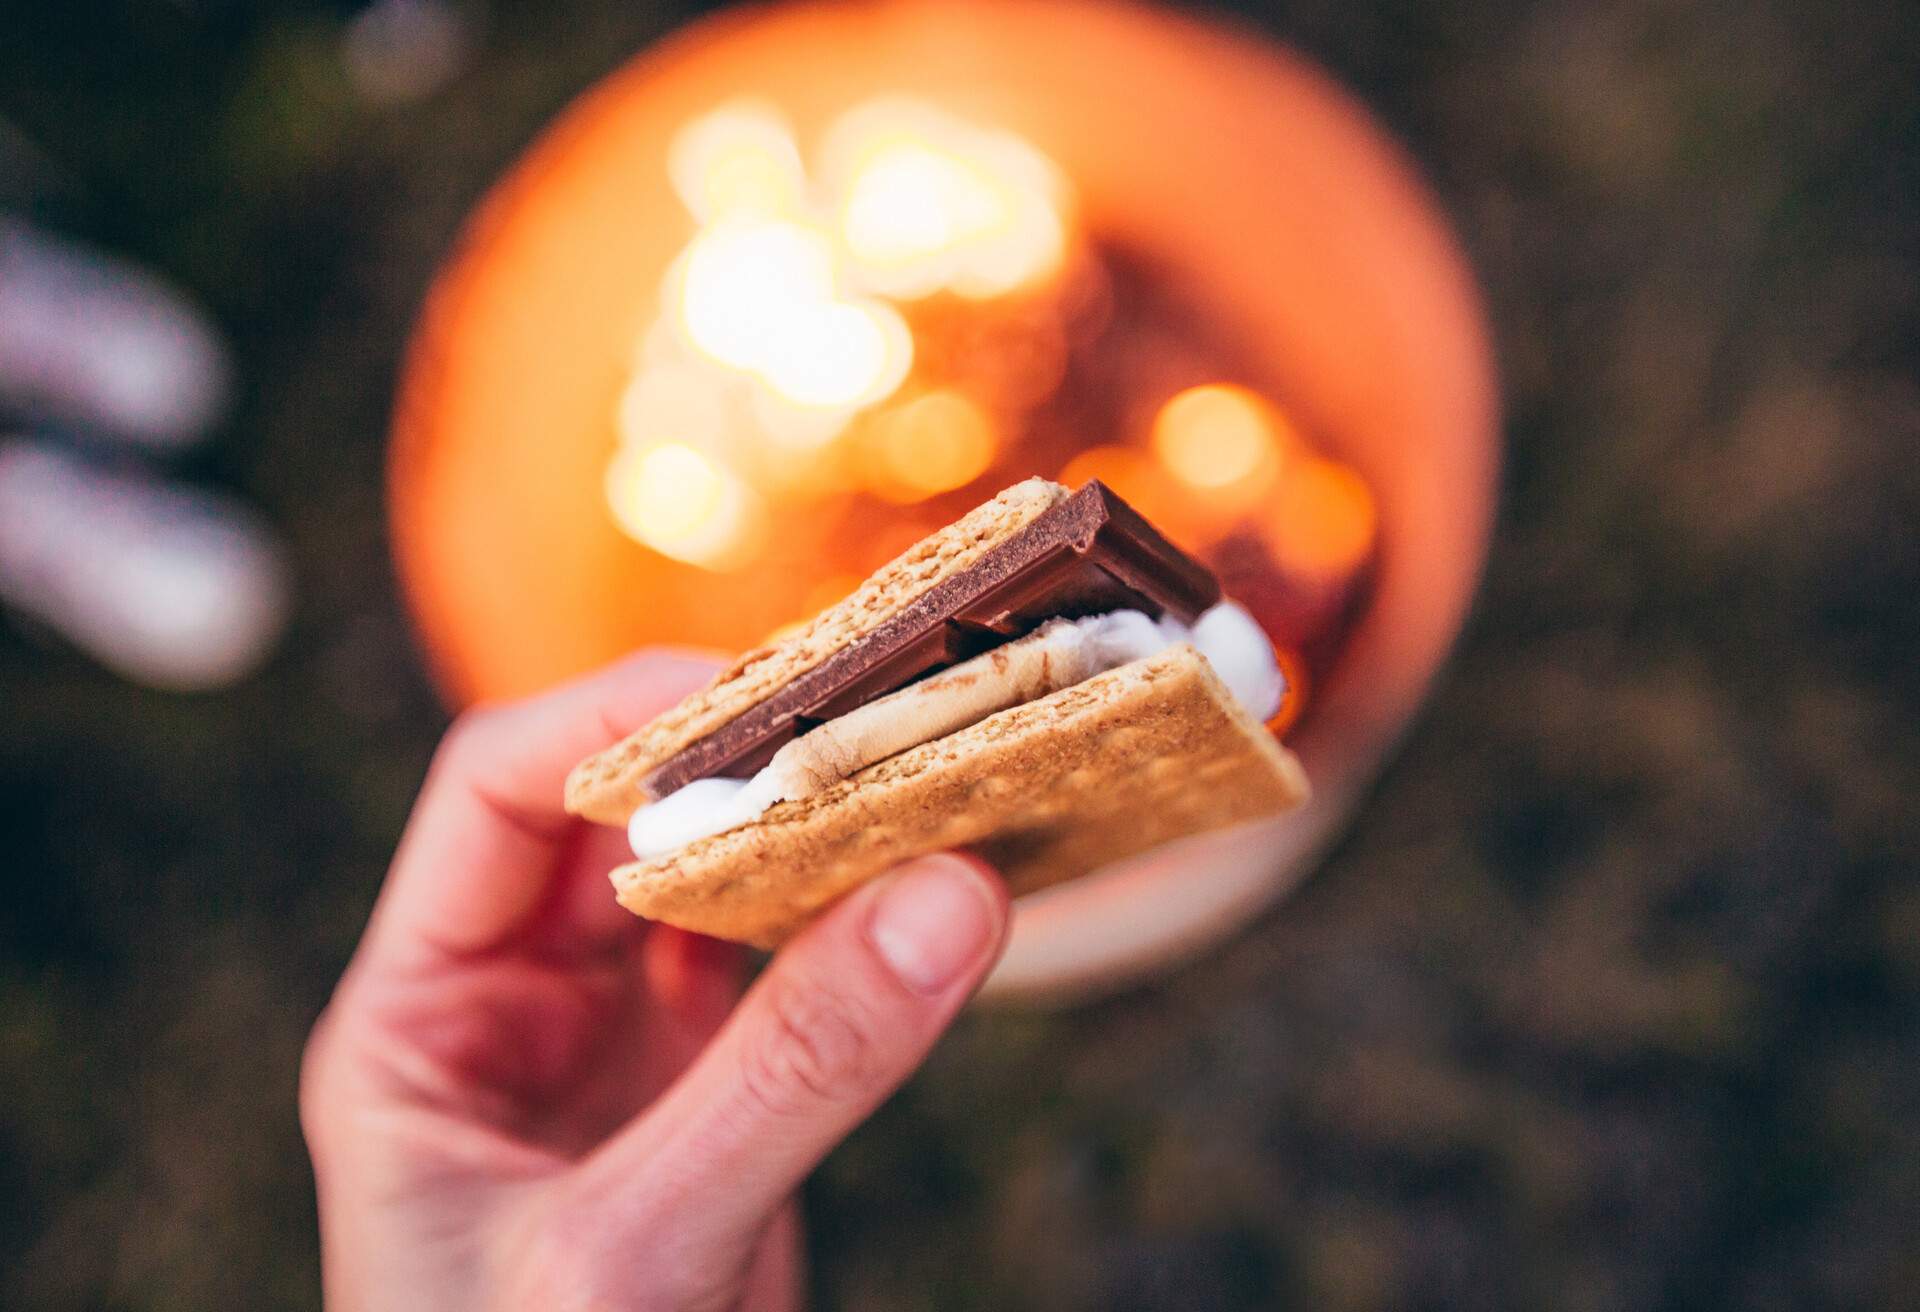 Holding s'more over a campfire.